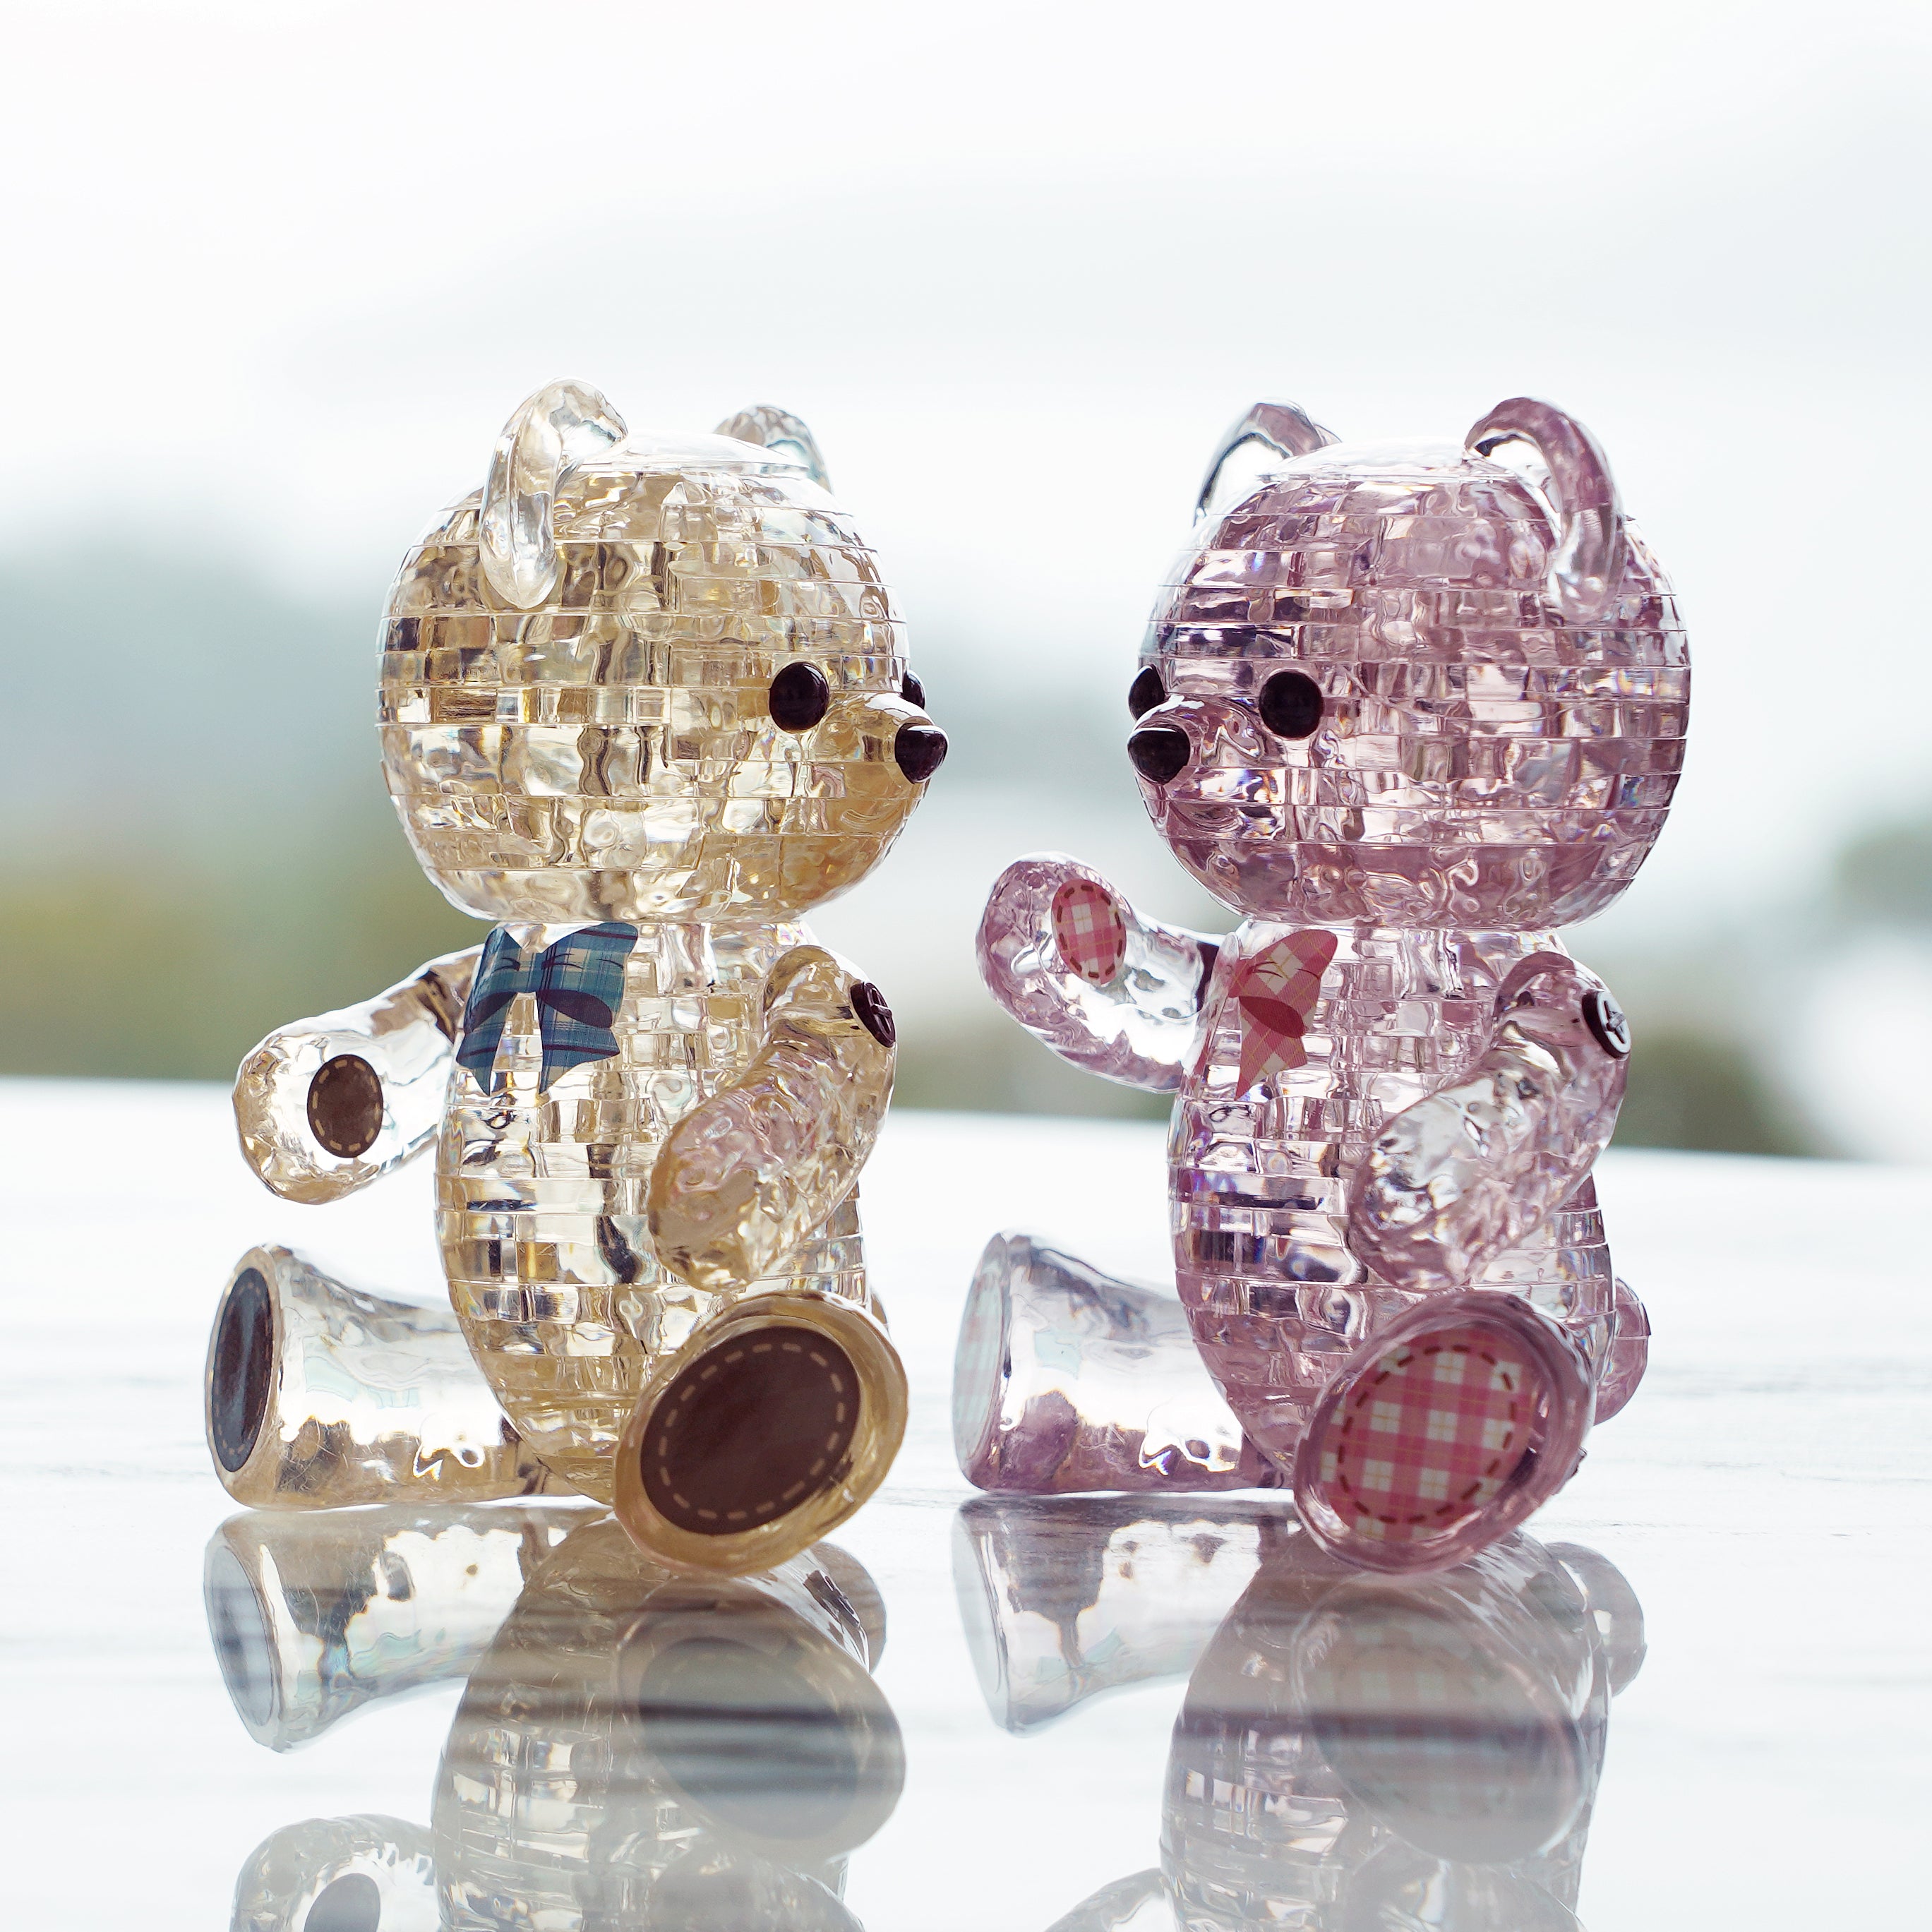 Off-white colored Jewel Bear Henry and pink colored Jewel Bear Lily sitting on a glass table under natural lighting. 